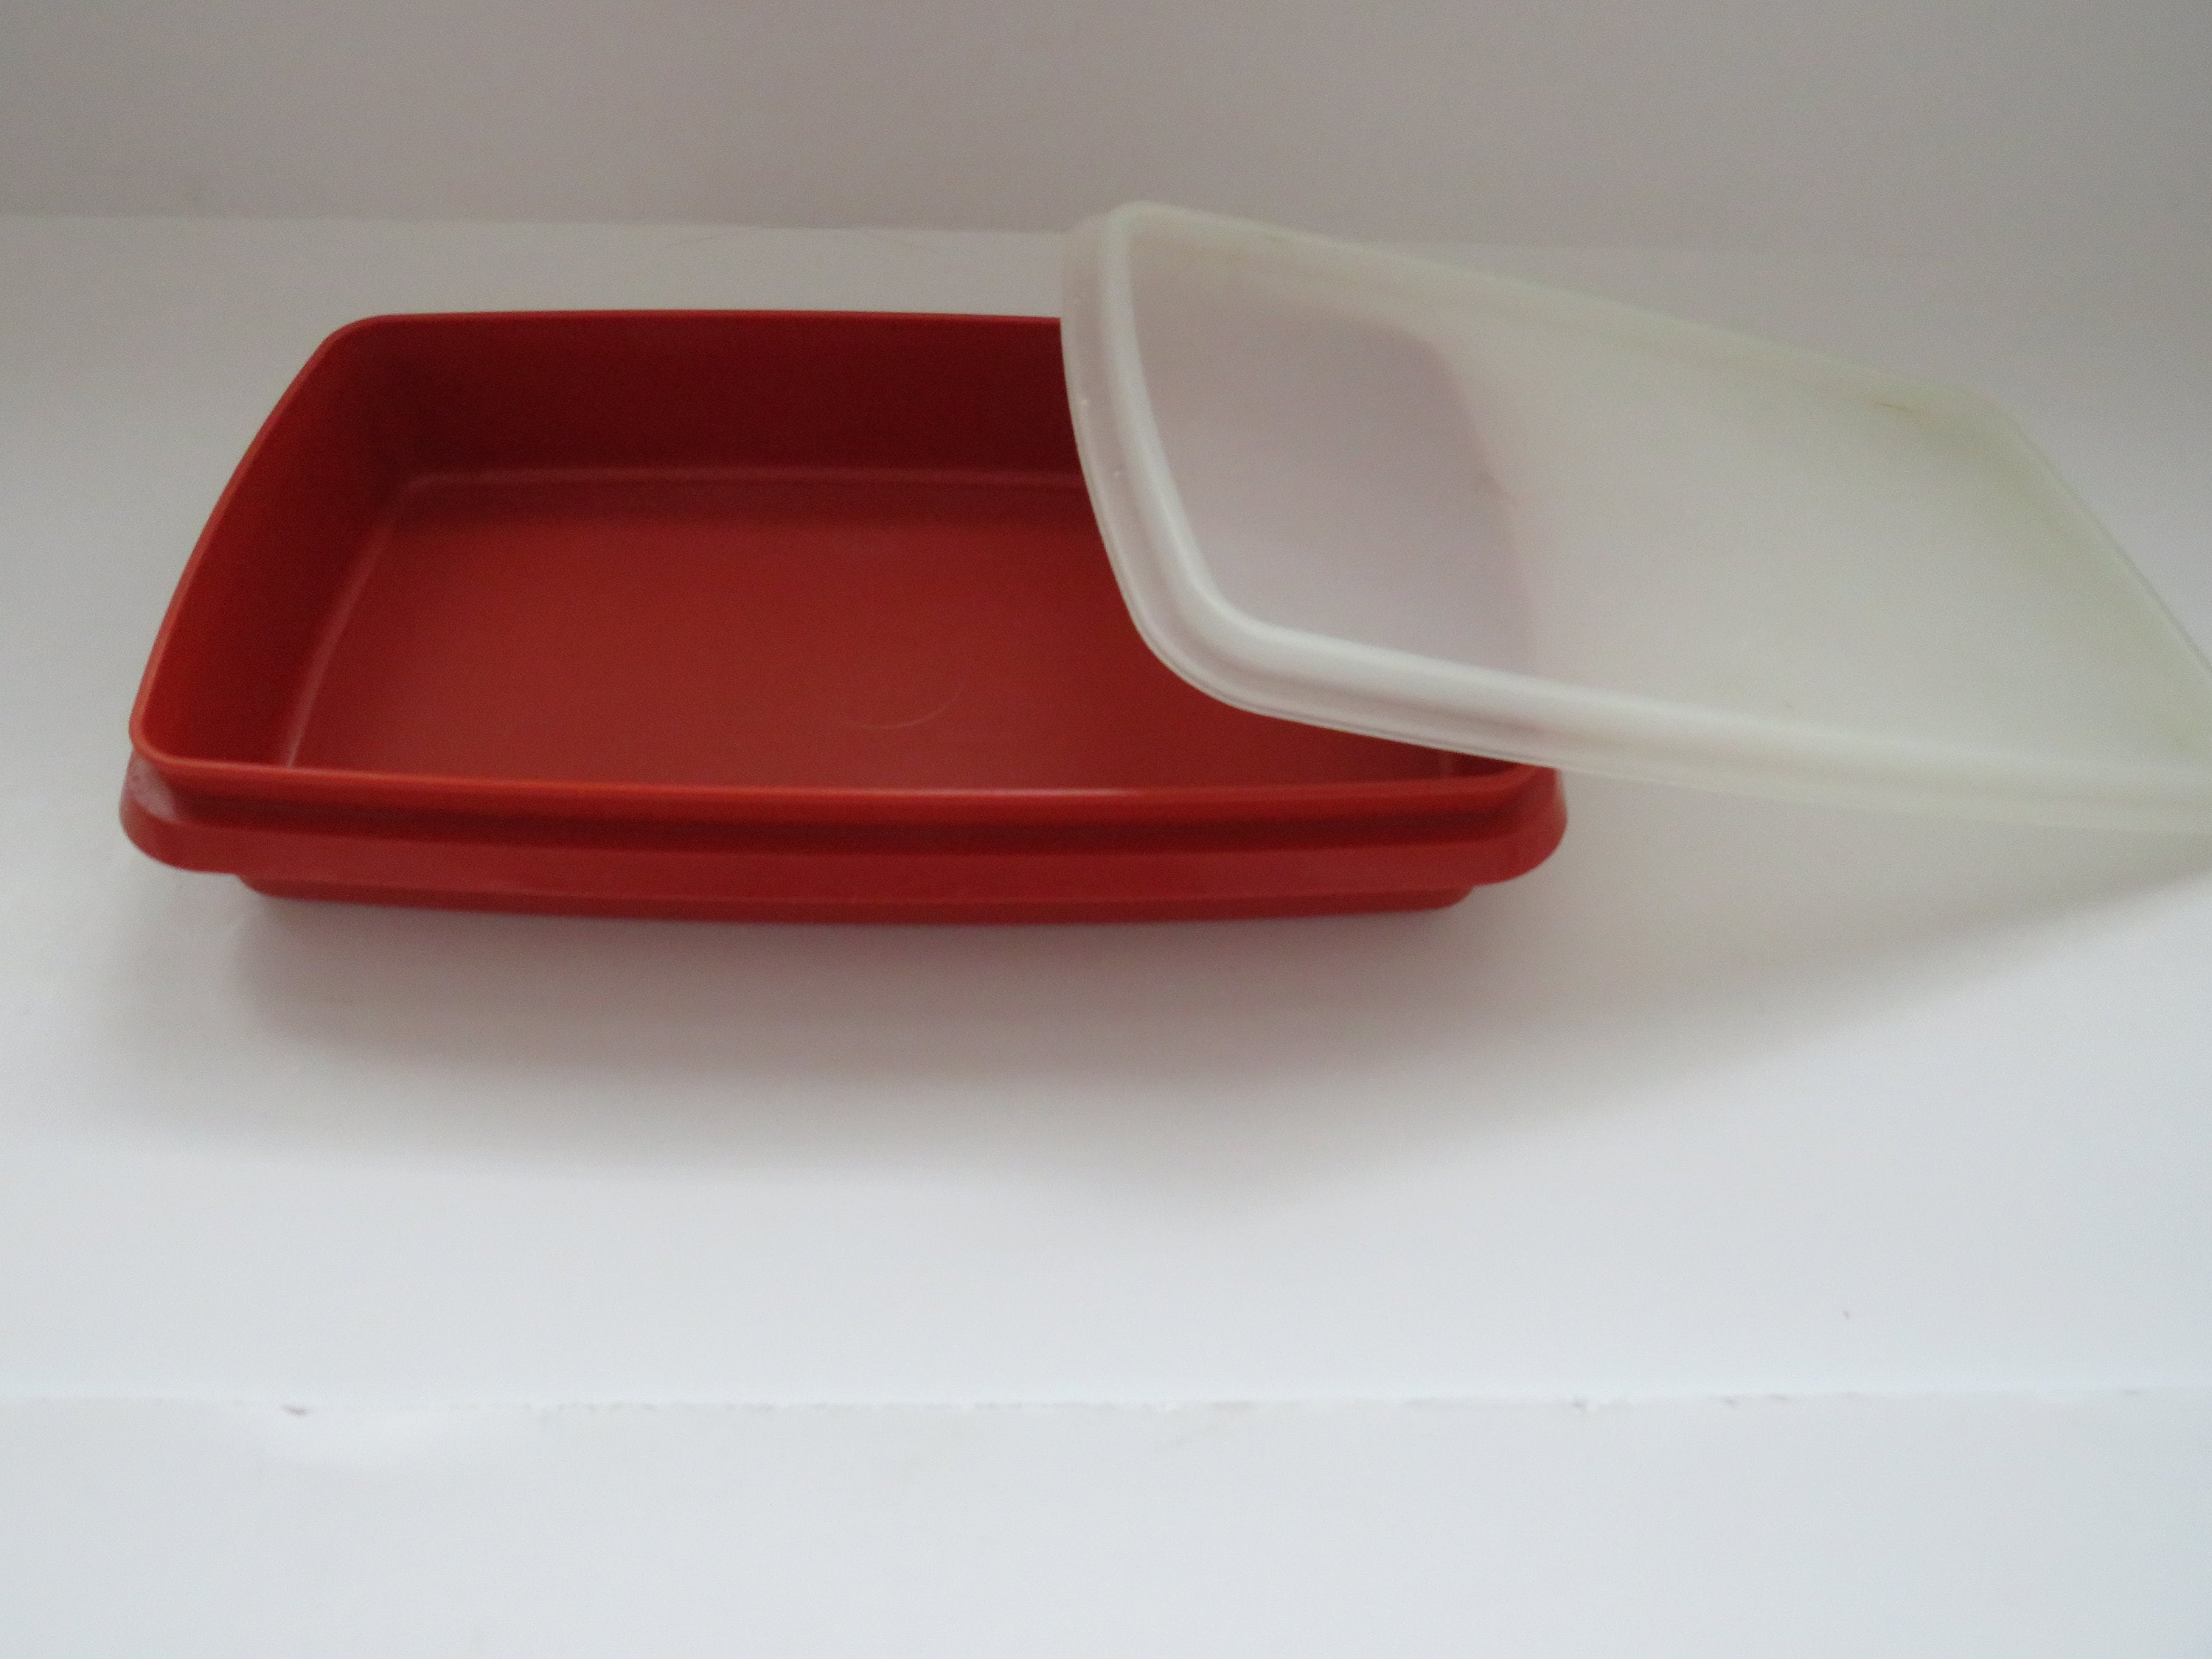 Tupperware Large Season Serve Marinade Container Paprika Orange Plastic  Food Storage Dish Meat Keeper Picnics BBQ Grilling RV Collectible 